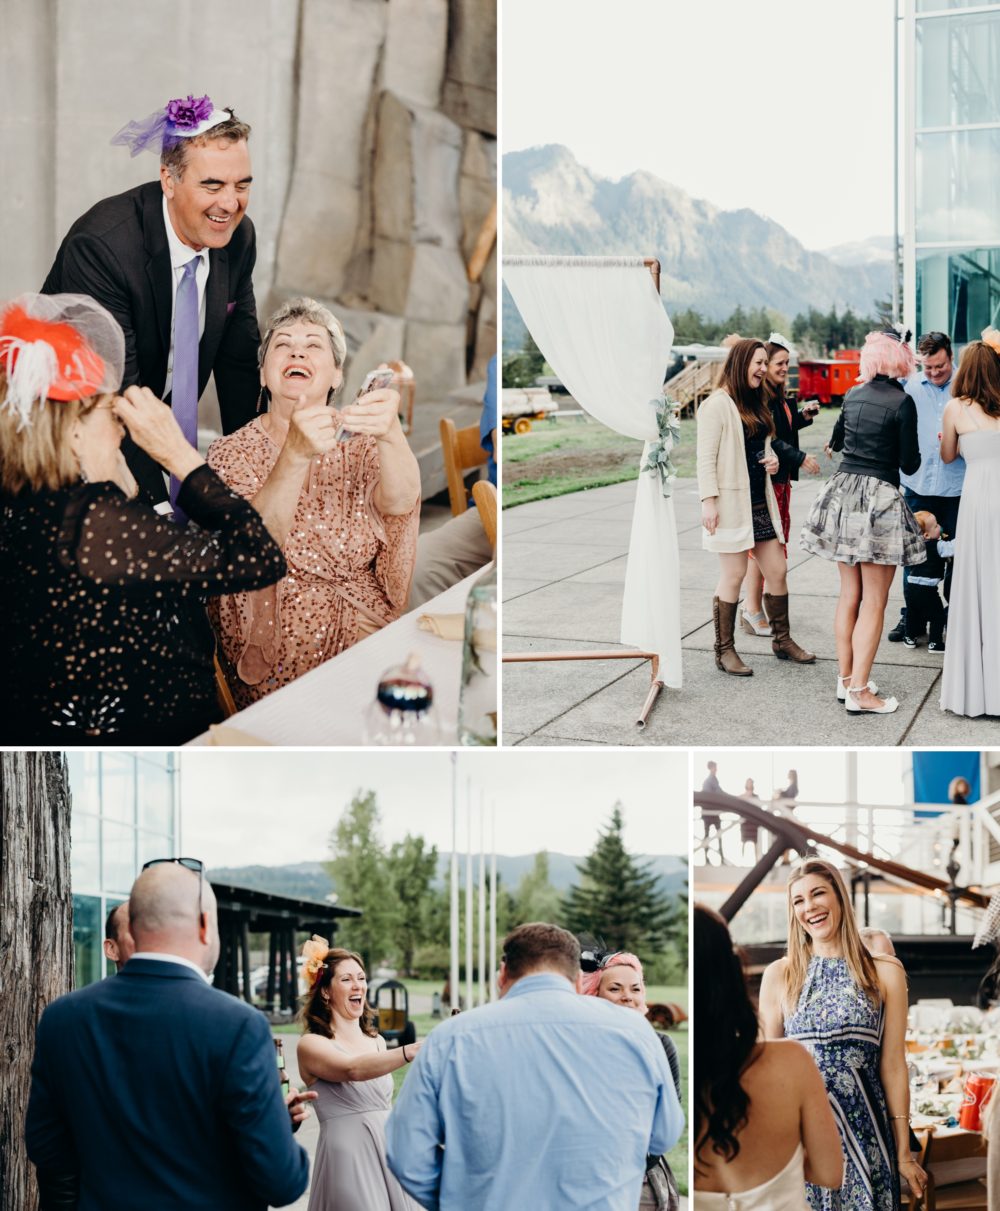 Candid wedding photography at Interpretive Center Museum wedding by Briana Morrison Photography